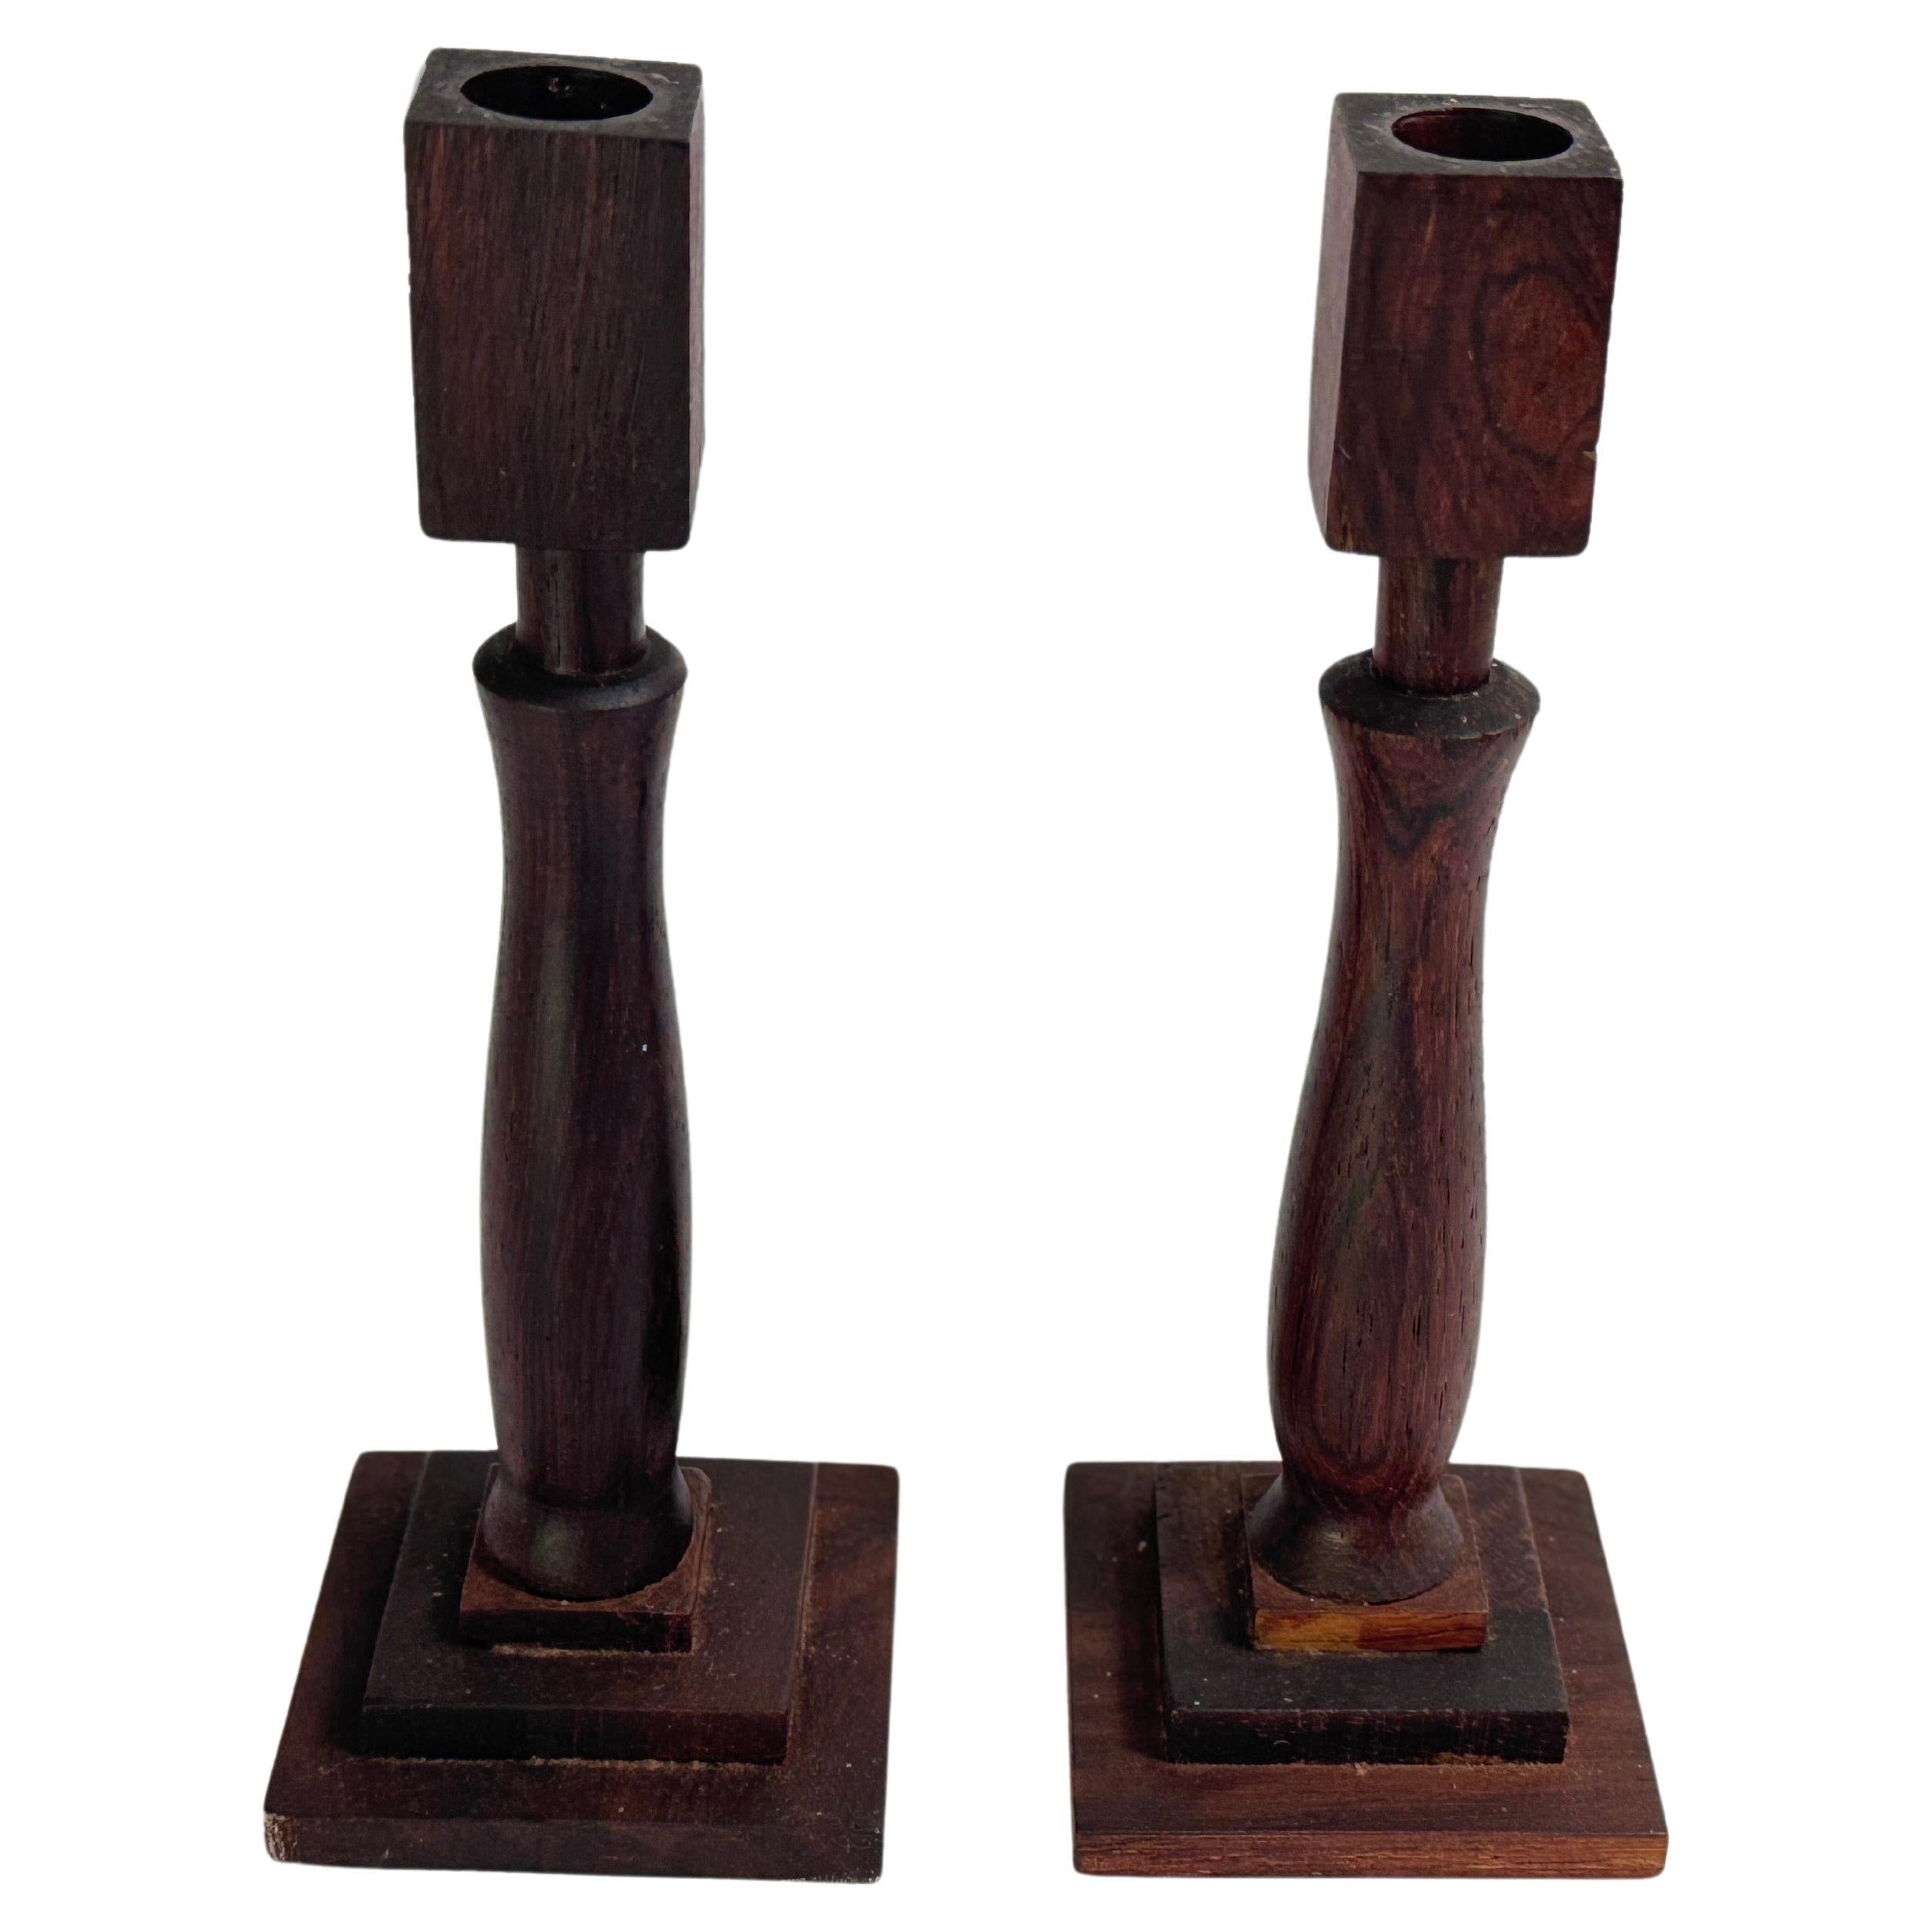 20th Century, Pair of Candleholders, Carved Scandinavian Brown color